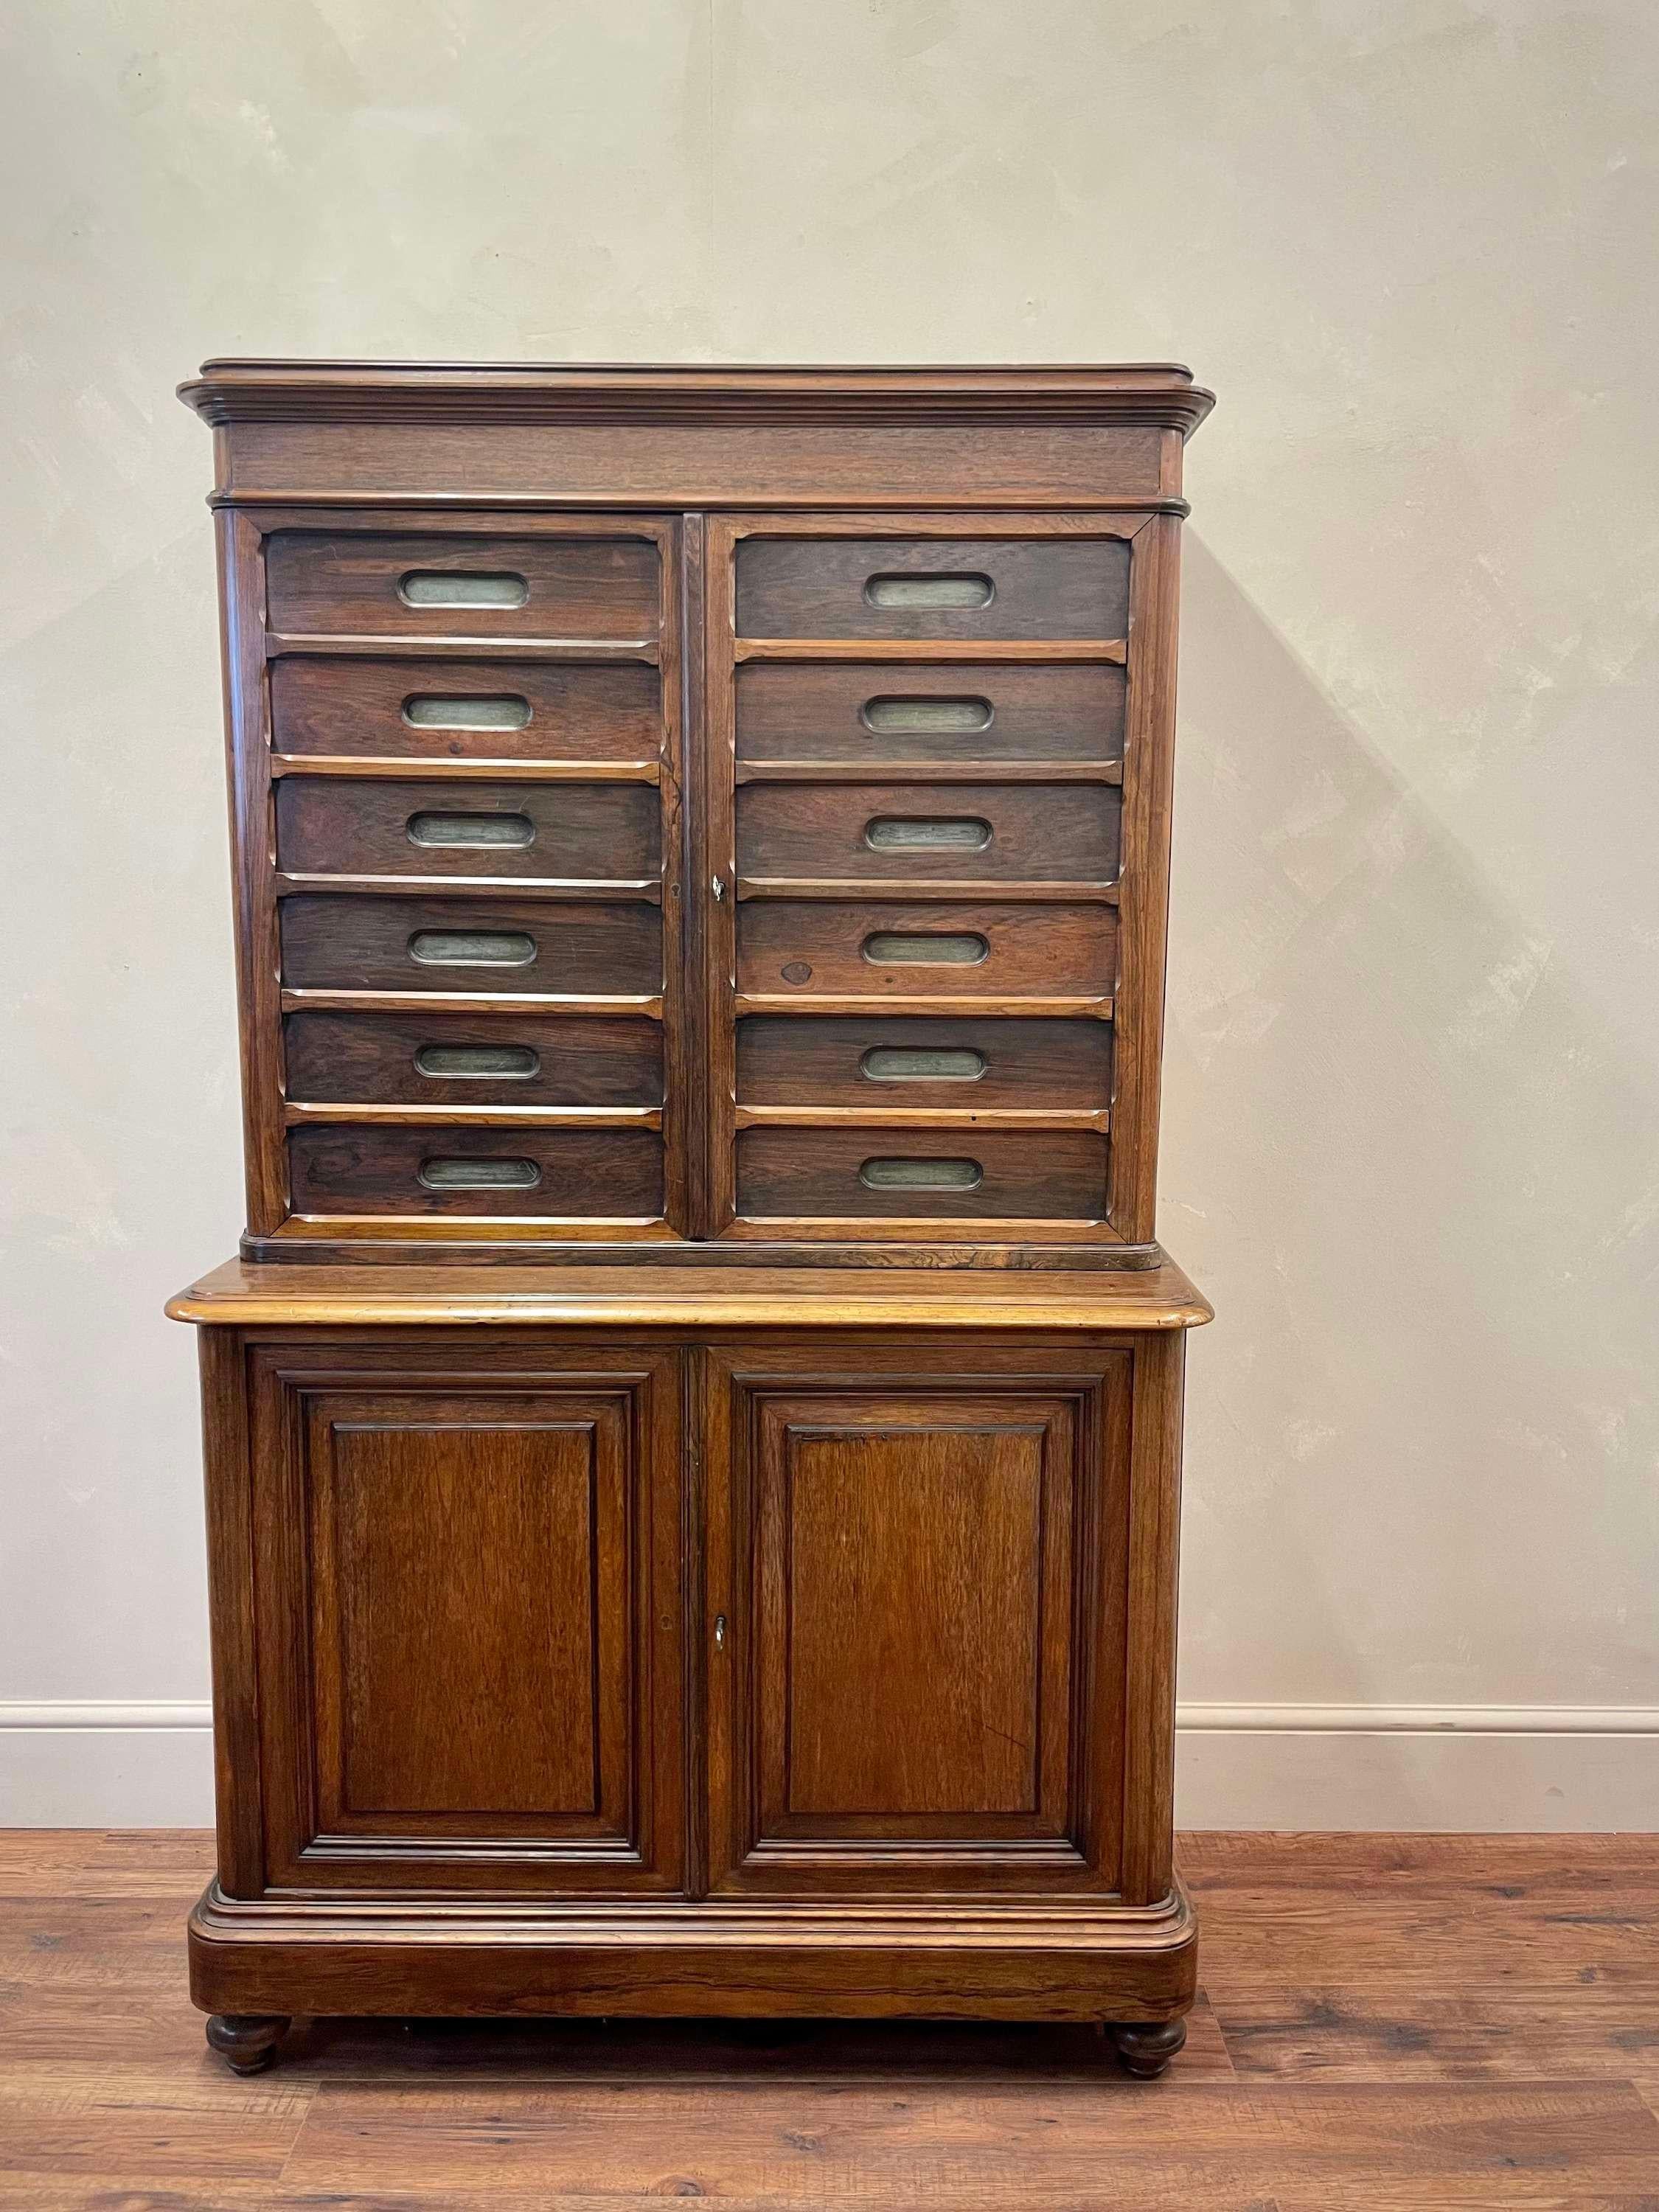 Smart set of Belgian postal/office mahogany / pine pigeon holes.
With 12 upper pigeon holes above a shelved cupboard below.
Working lock.
Clean and solid.
Great for office storage or even plates for a kitchen
Dimensions:W: 106cm (41.7